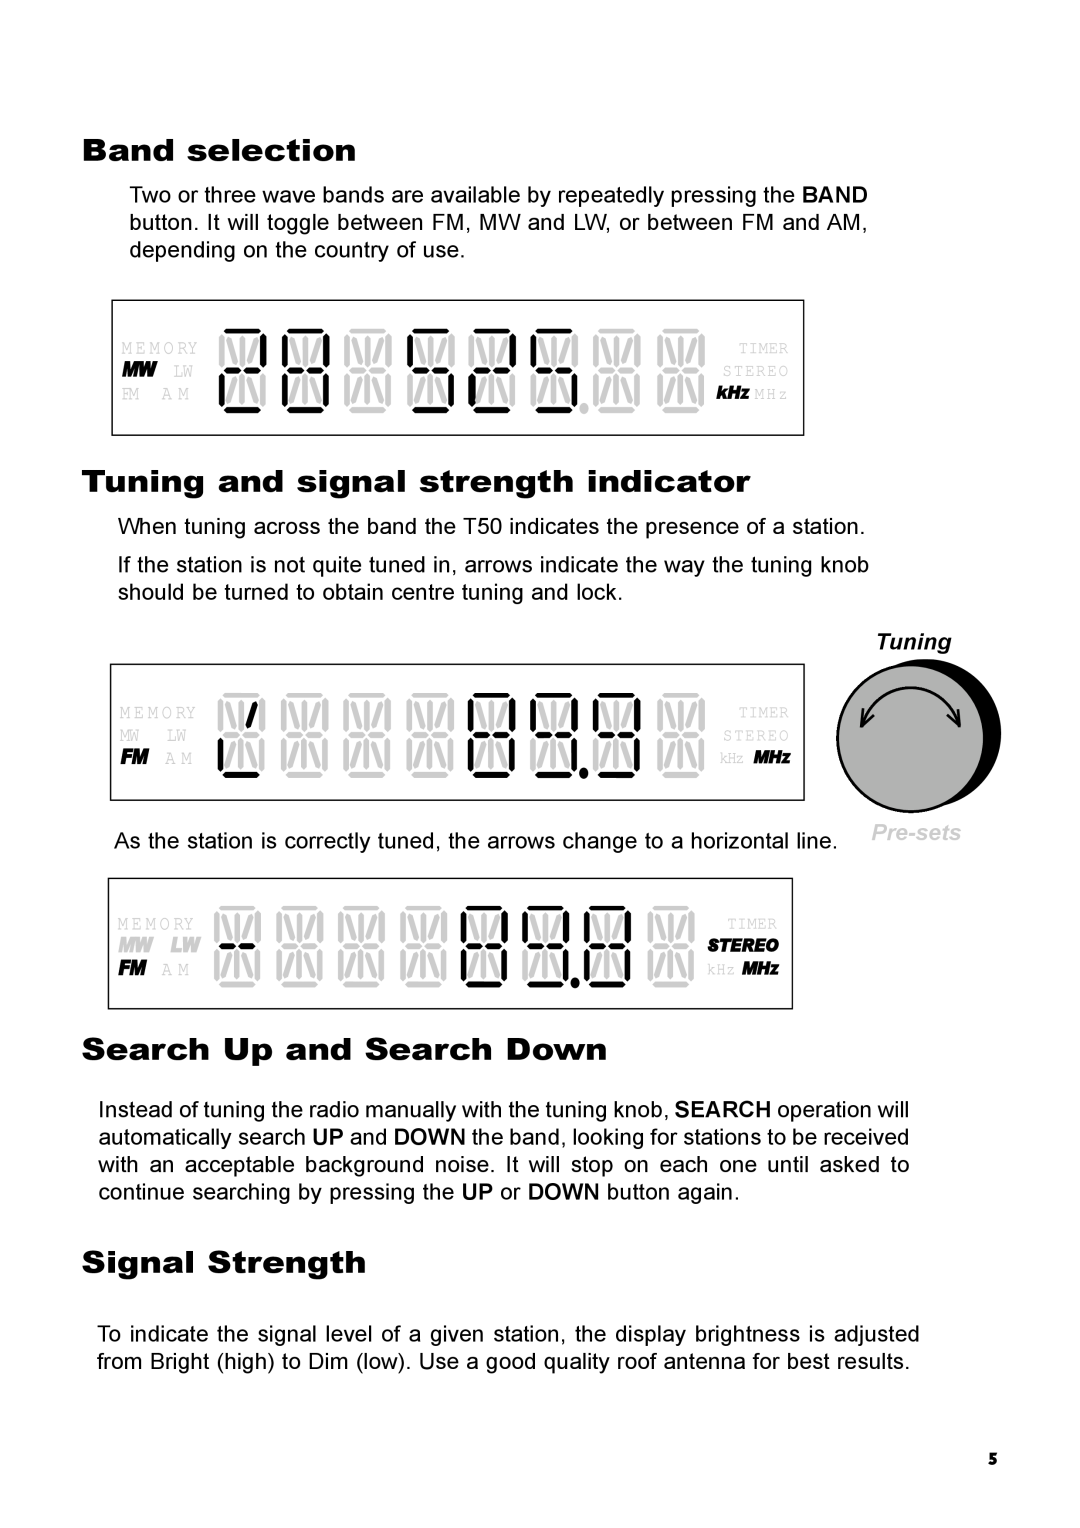 Creek Audio T50 manual Band selection, Tuning and signal strength indicator, Search Up and Search Down, Signal Strength 